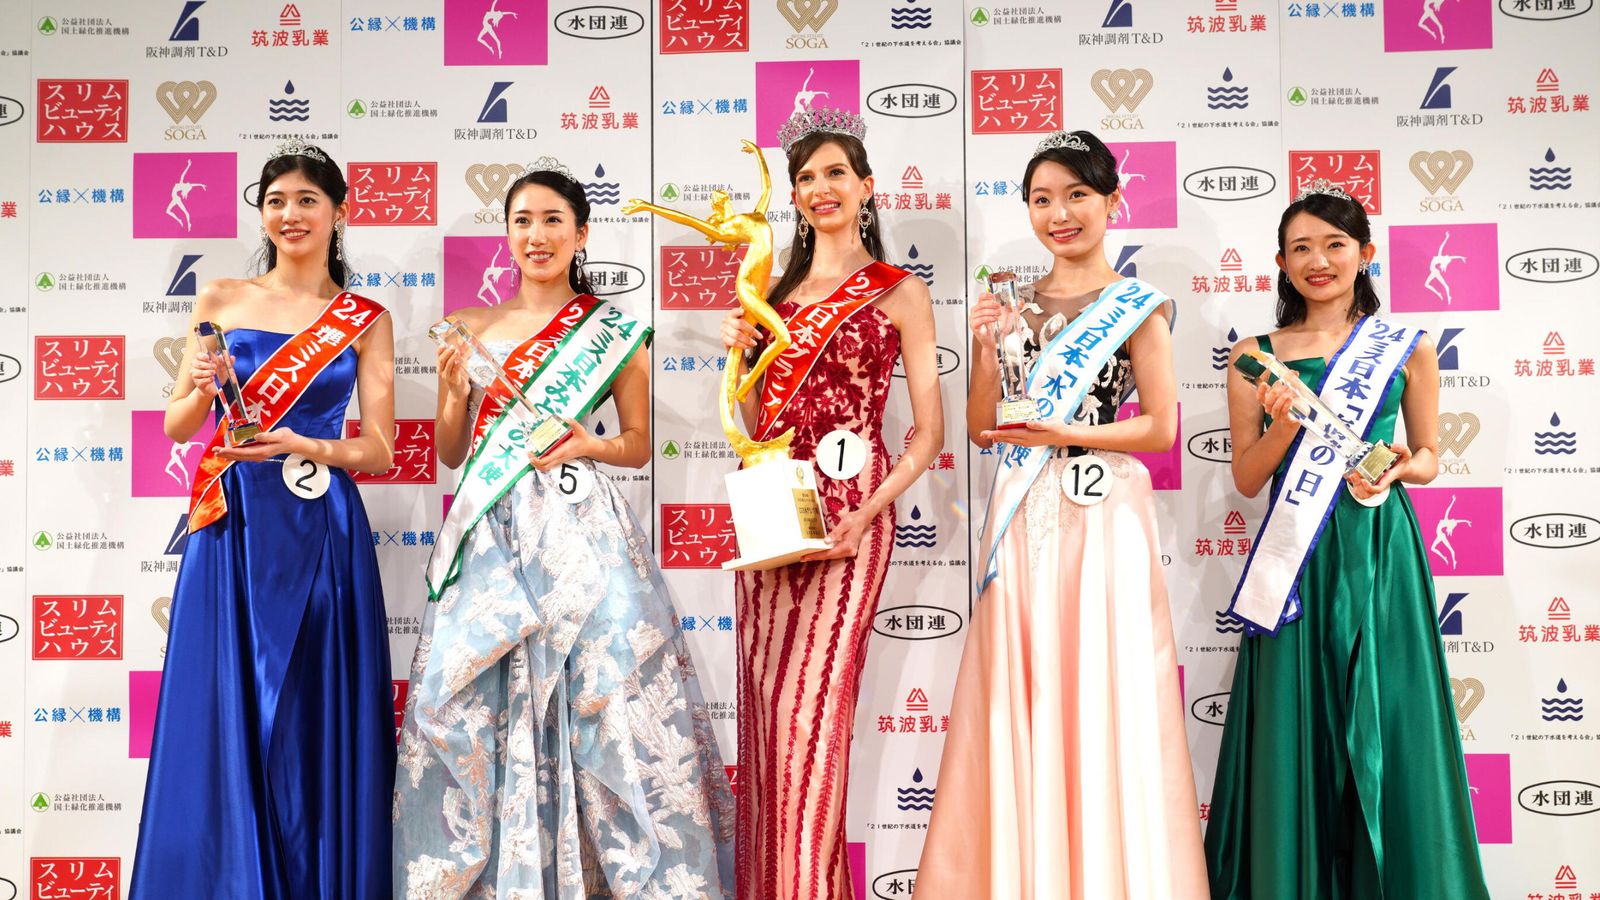 racism row after miss japan winner dubbed not japanese-looking enough